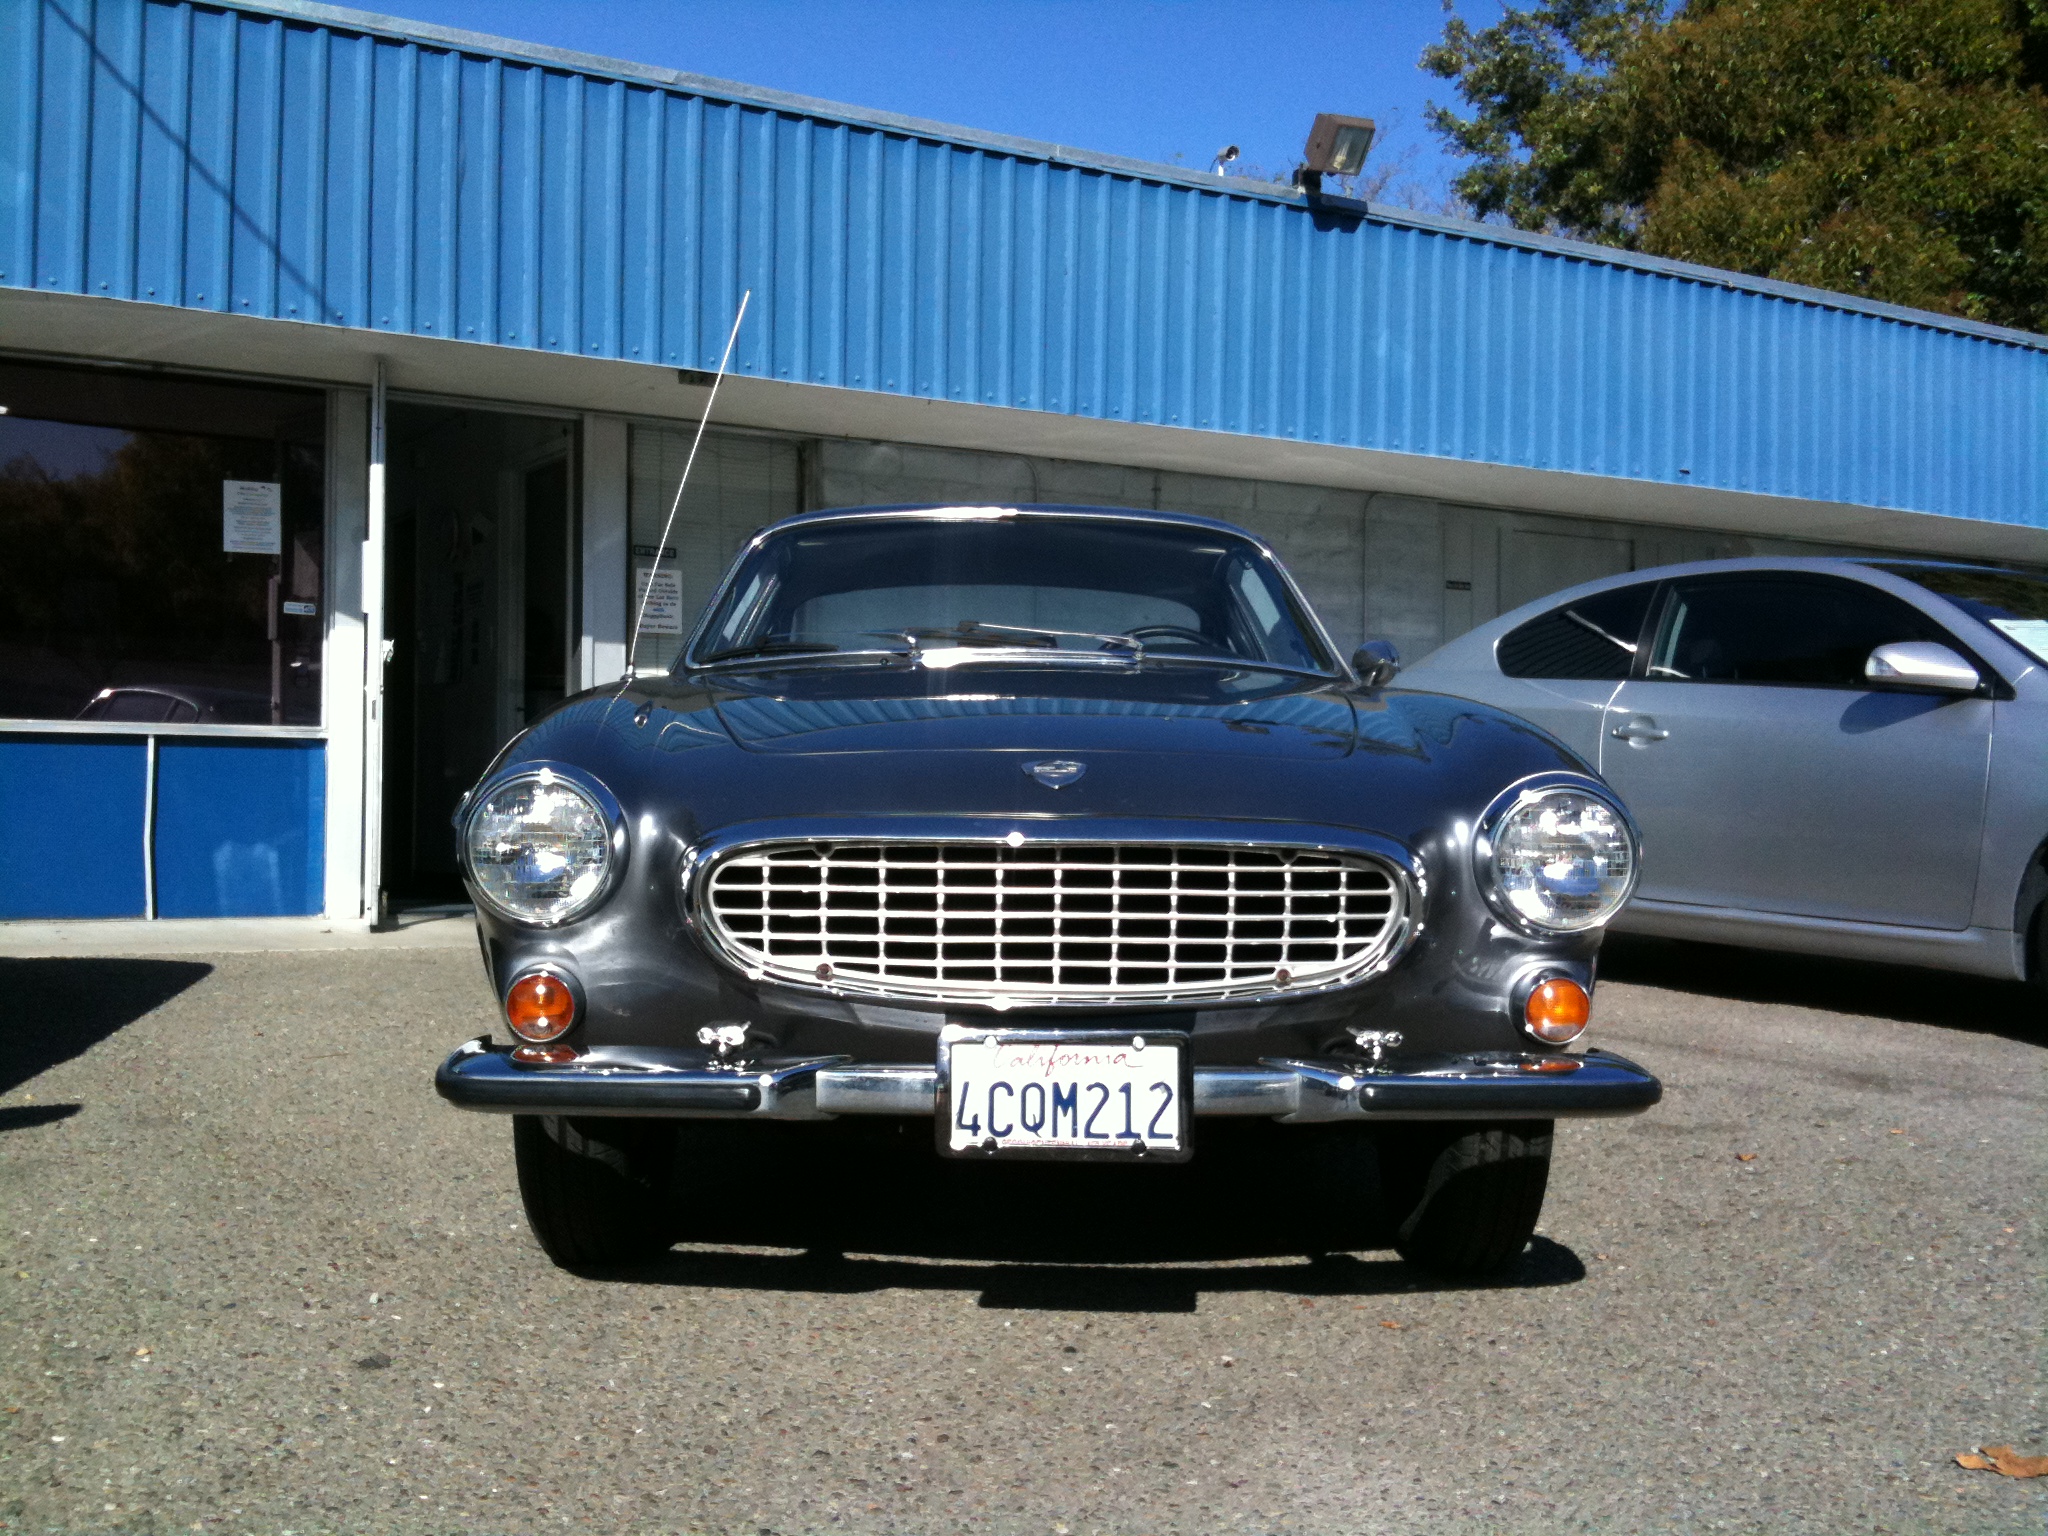 Volvo P1800 Coupe | Flickr - Photo Sharing!